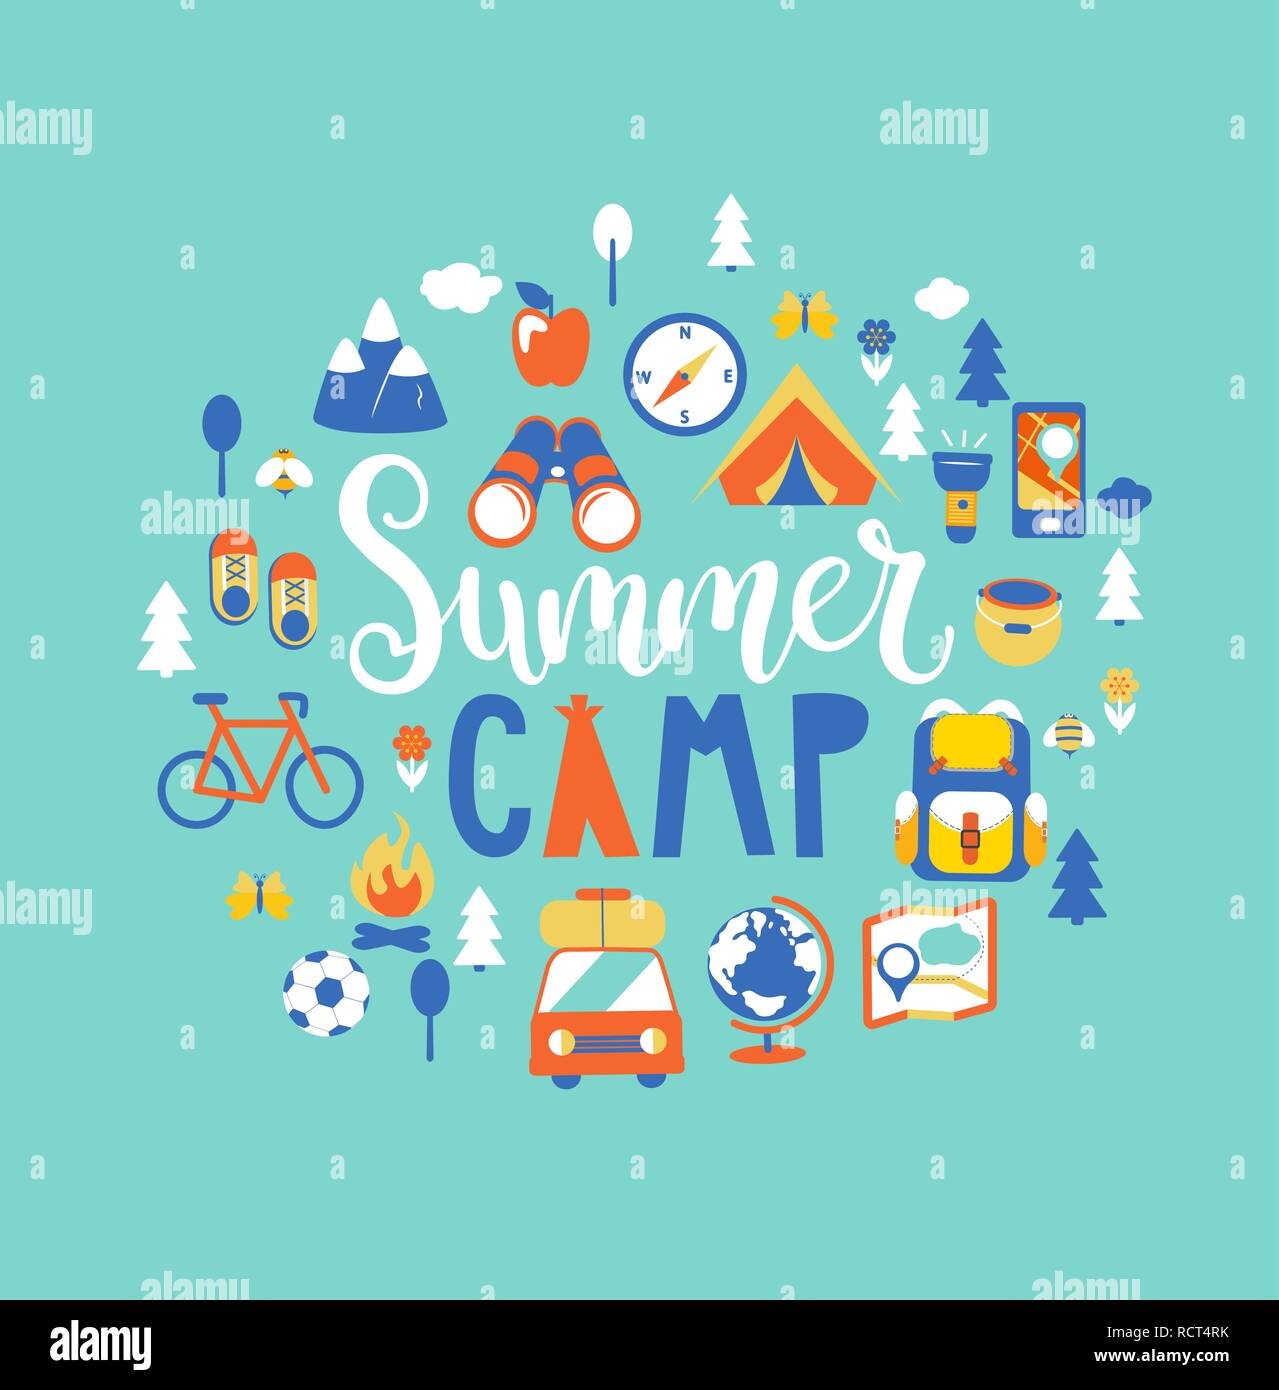 Summer camp concept with handdrawn lettering, Camping and Travelling on holiday with a lot of camping equipment such as tent, backpack and others. Poster in flat style, vector illustration. Stock Vector